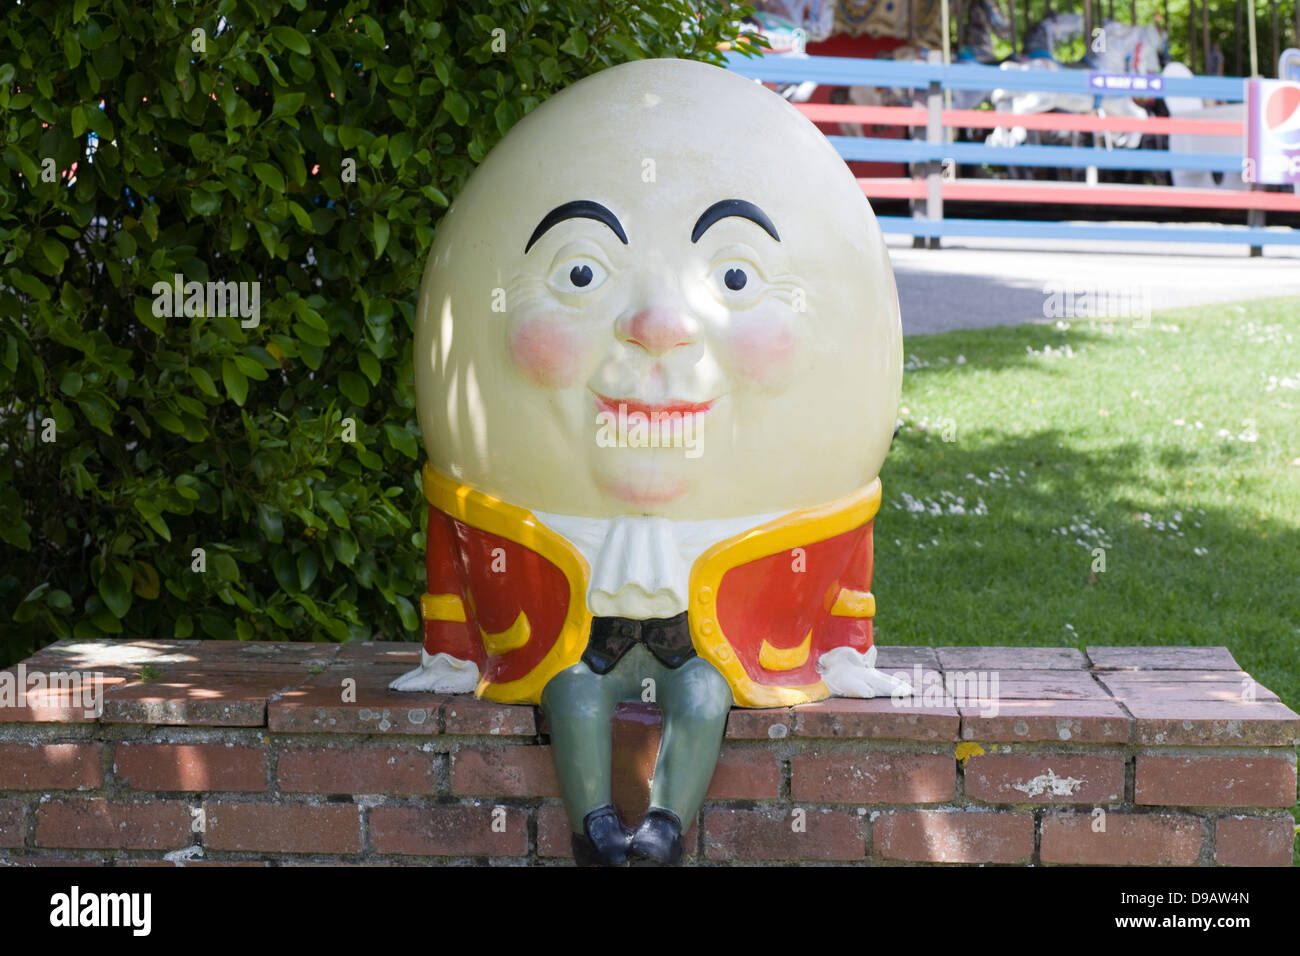 A Statue of Humpty Dumpty sat on a Red Brick Wall Stock Photo